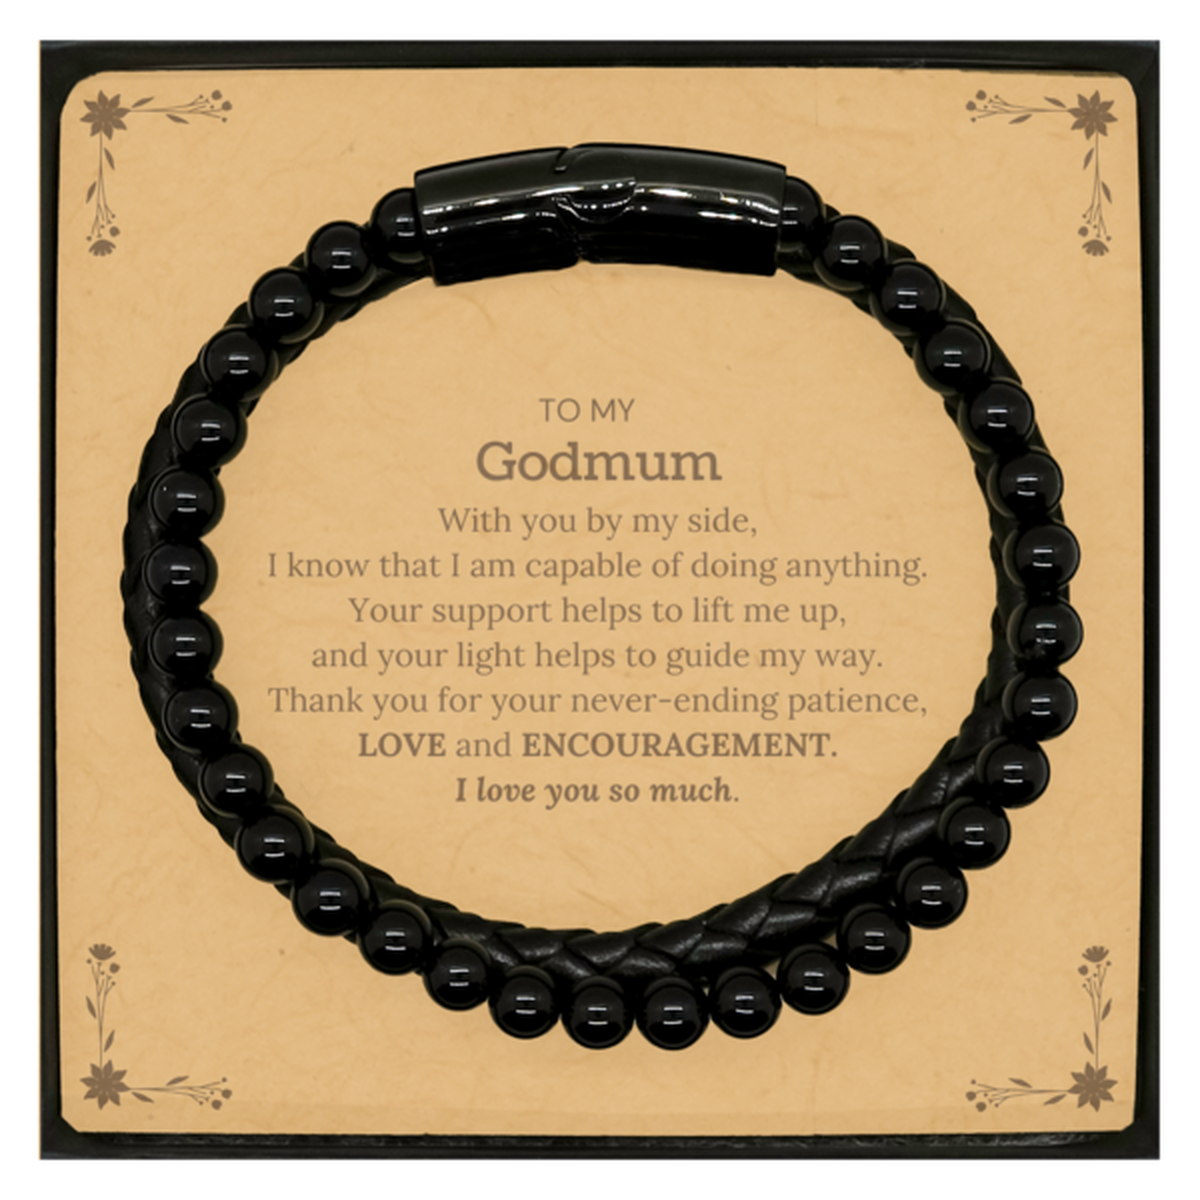 Appreciation Godmum Stone Leather Bracelets Gifts, To My Godmum Birthday Christmas Wedding Keepsake Gifts for Godmum With you by my side, I know that I am capable of doing anything. I love you so much